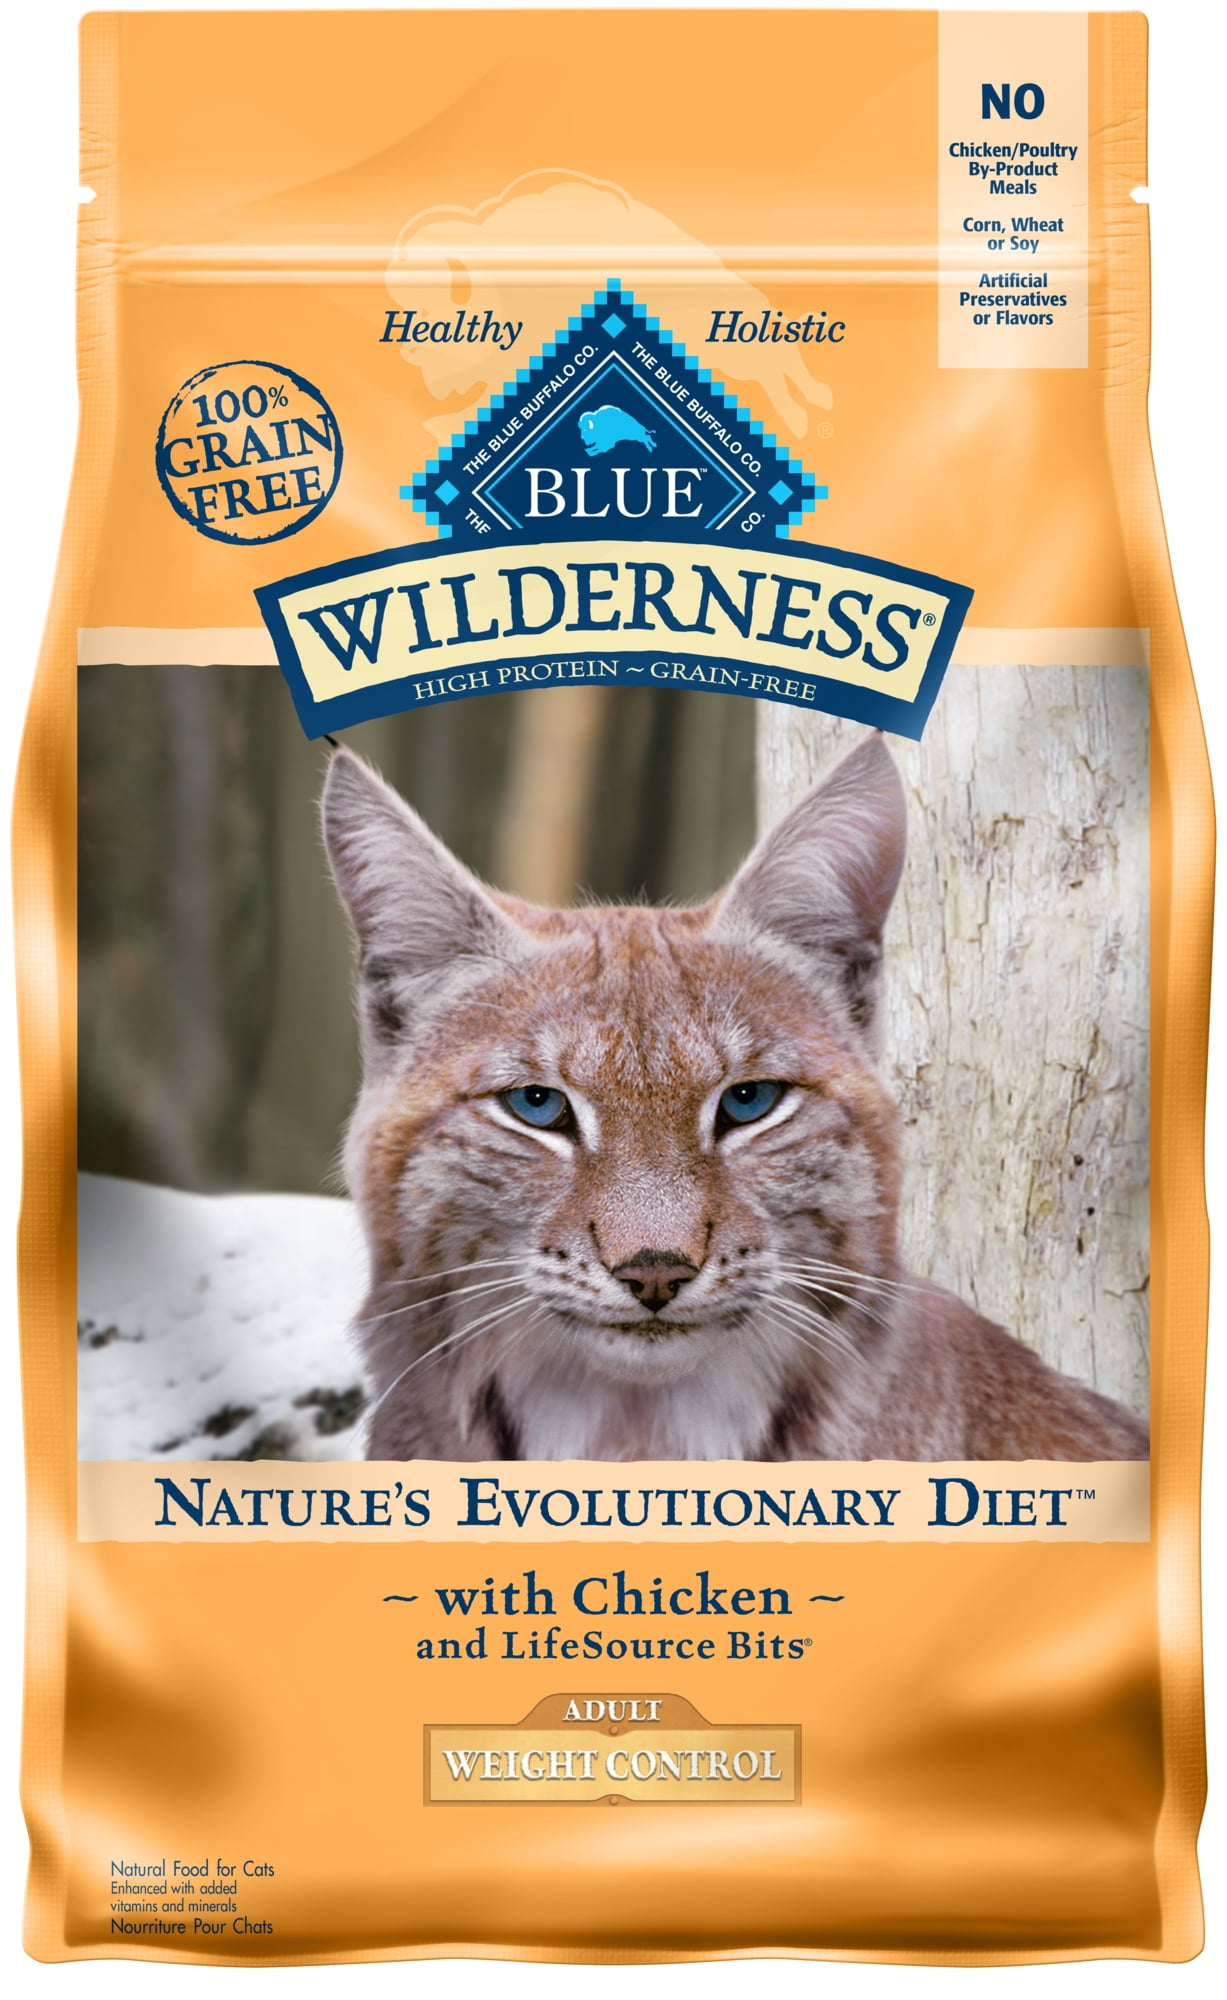 Blue Buffalo Wilderness High Protein Grain Free, Natural Adult Weight